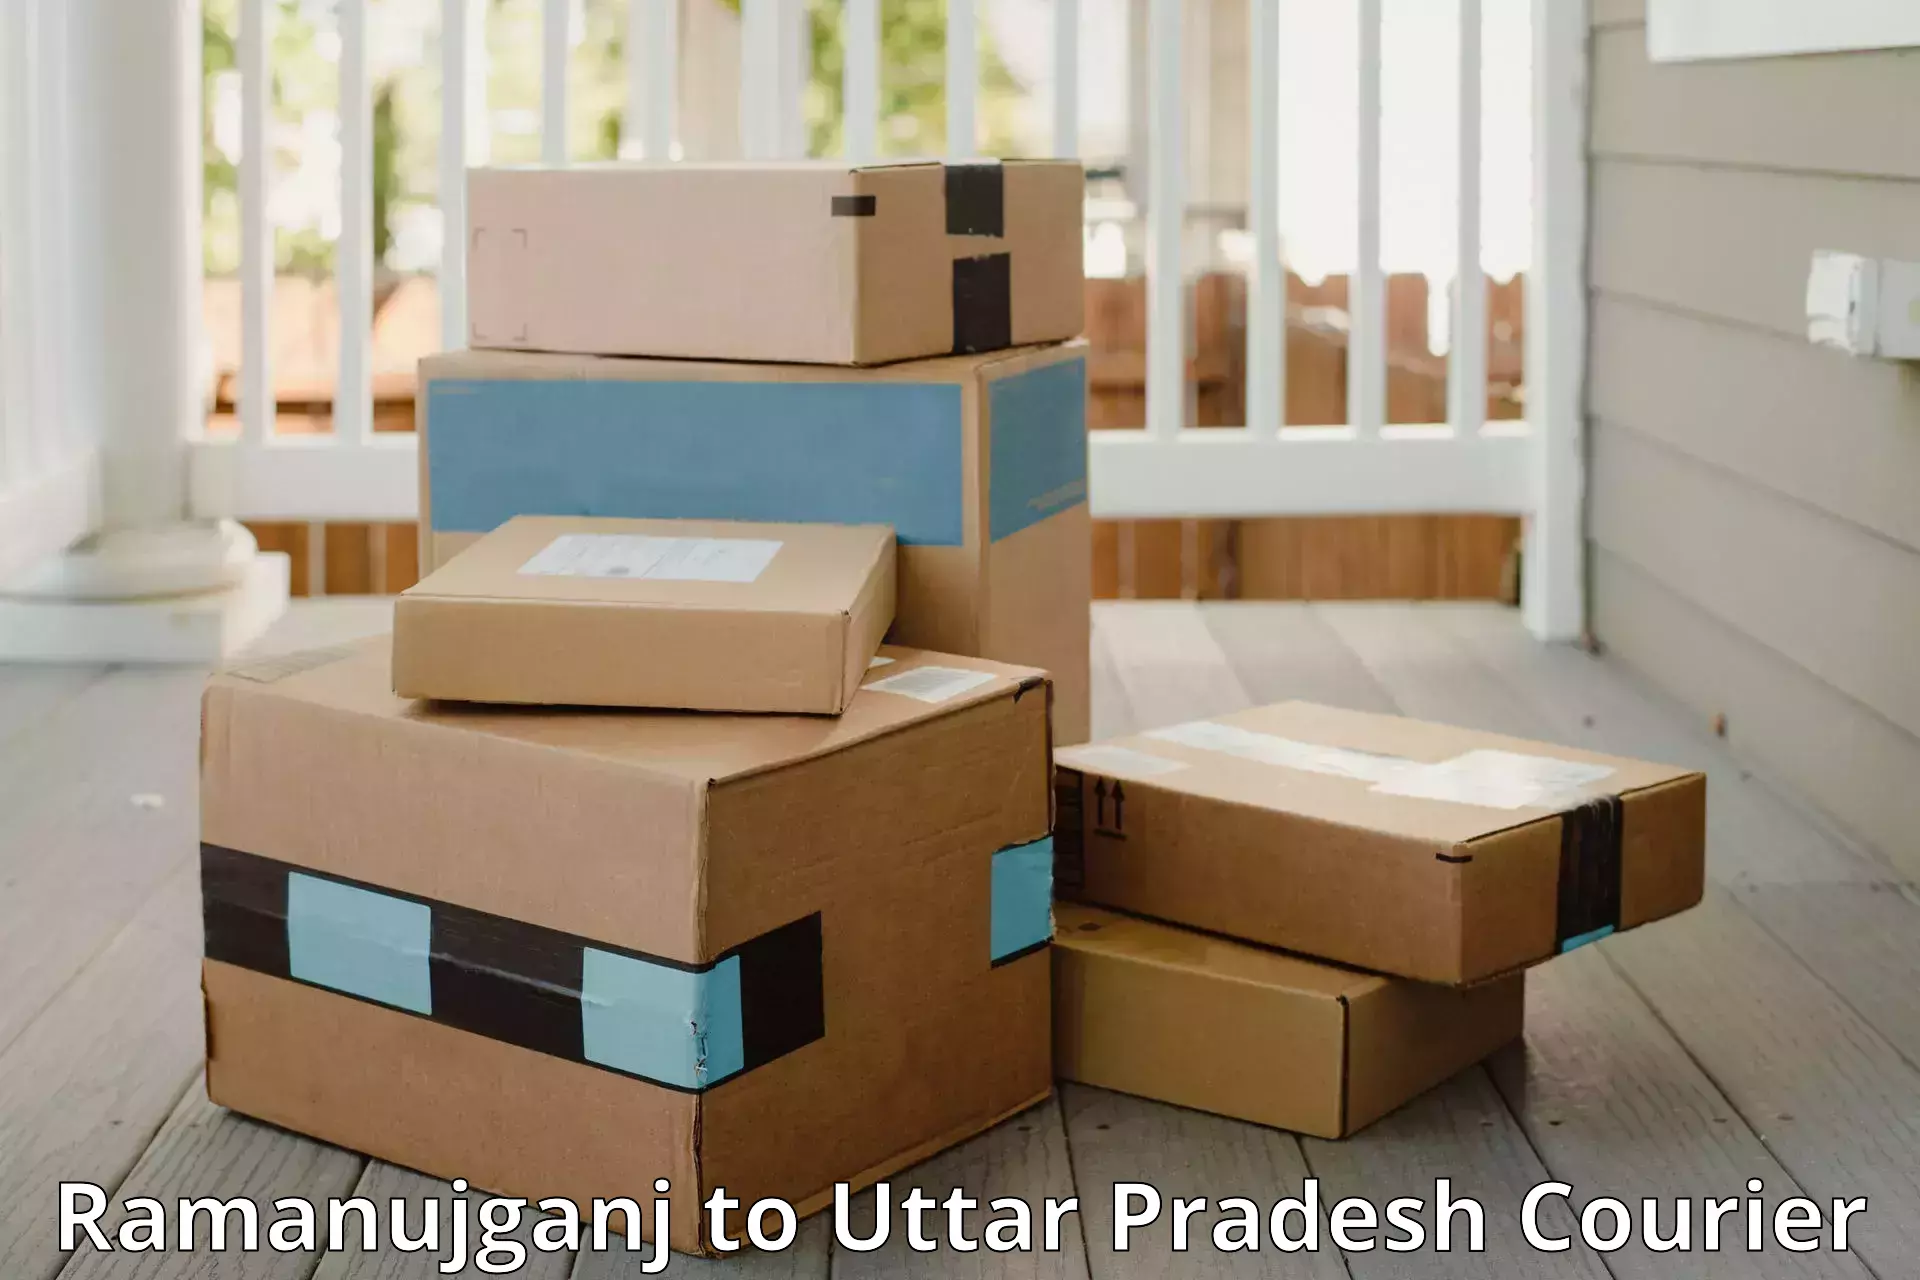 Baggage delivery technology Ramanujganj to Bhadohi